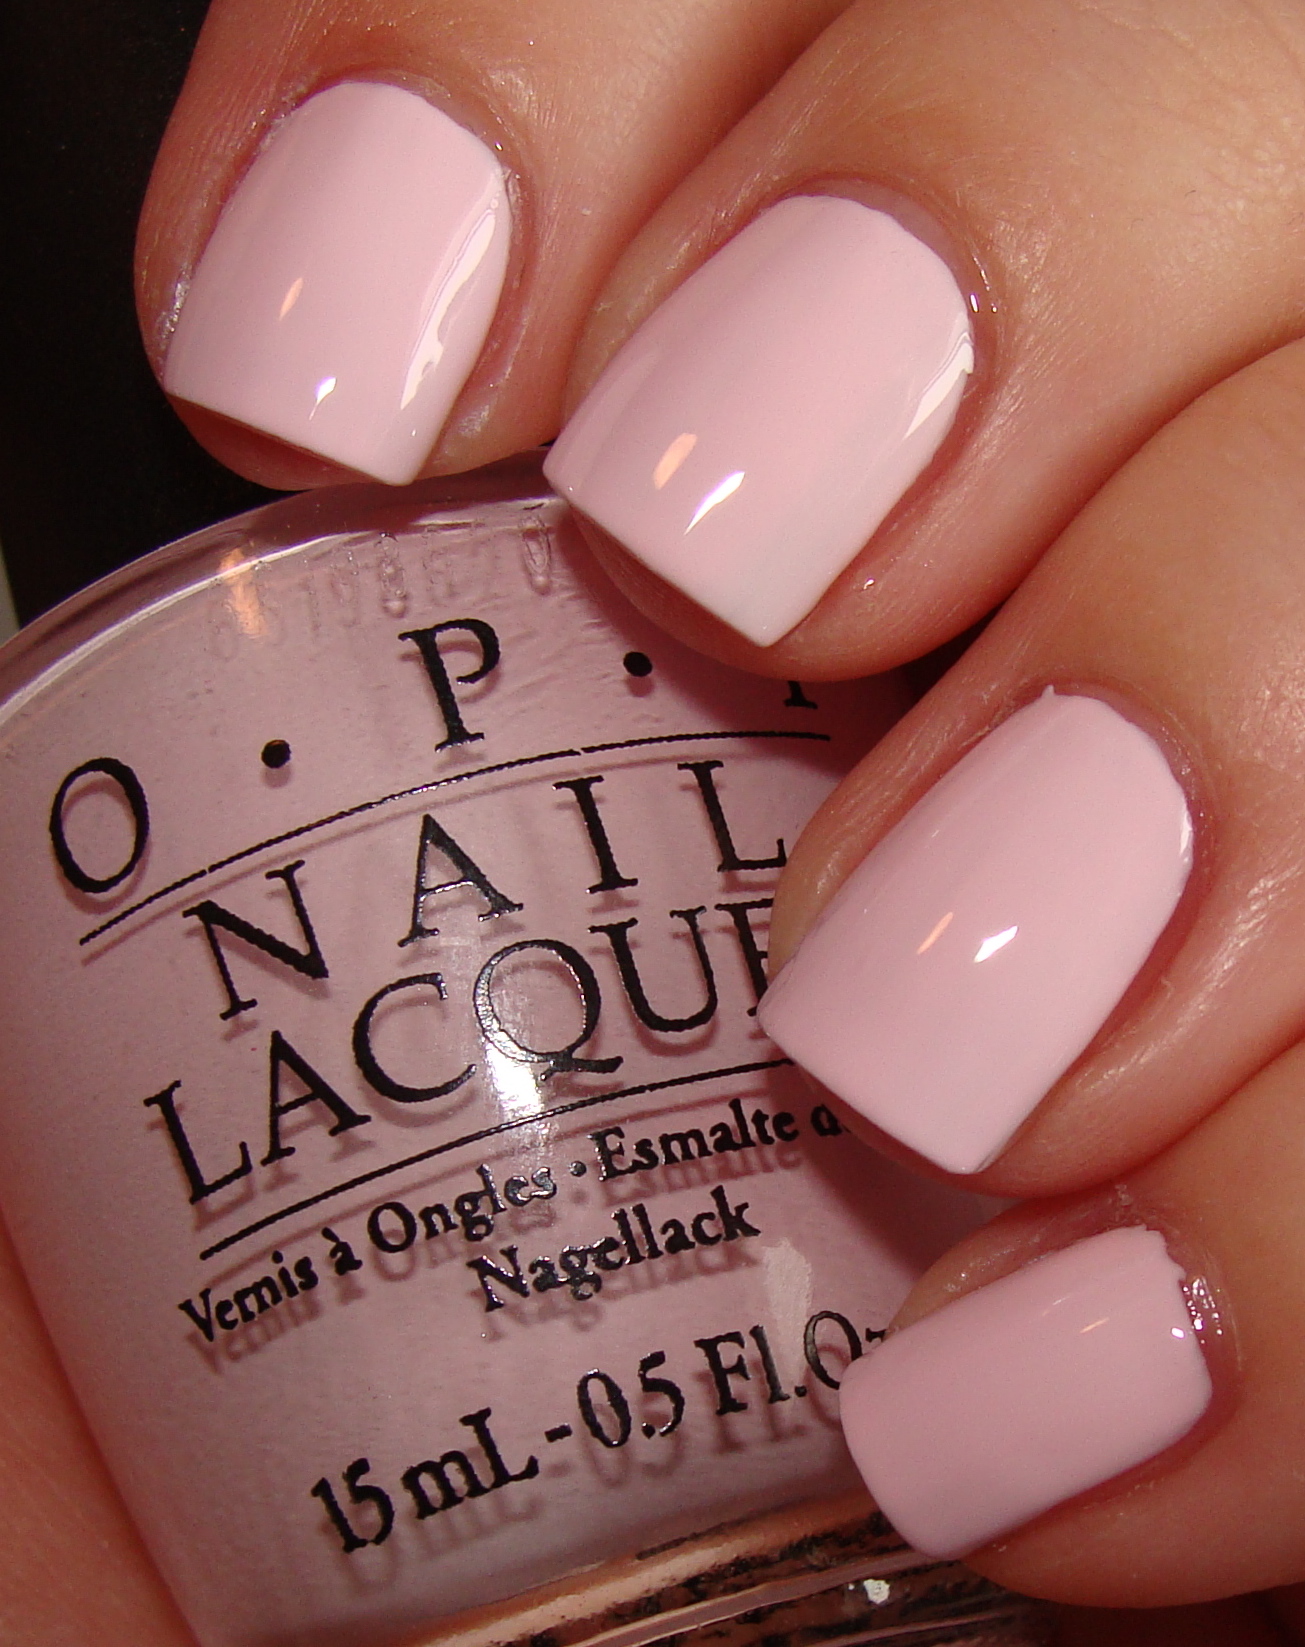 Pin by Brittany Caldwell on Things I Like | Pale pink nails, Pink nail ...